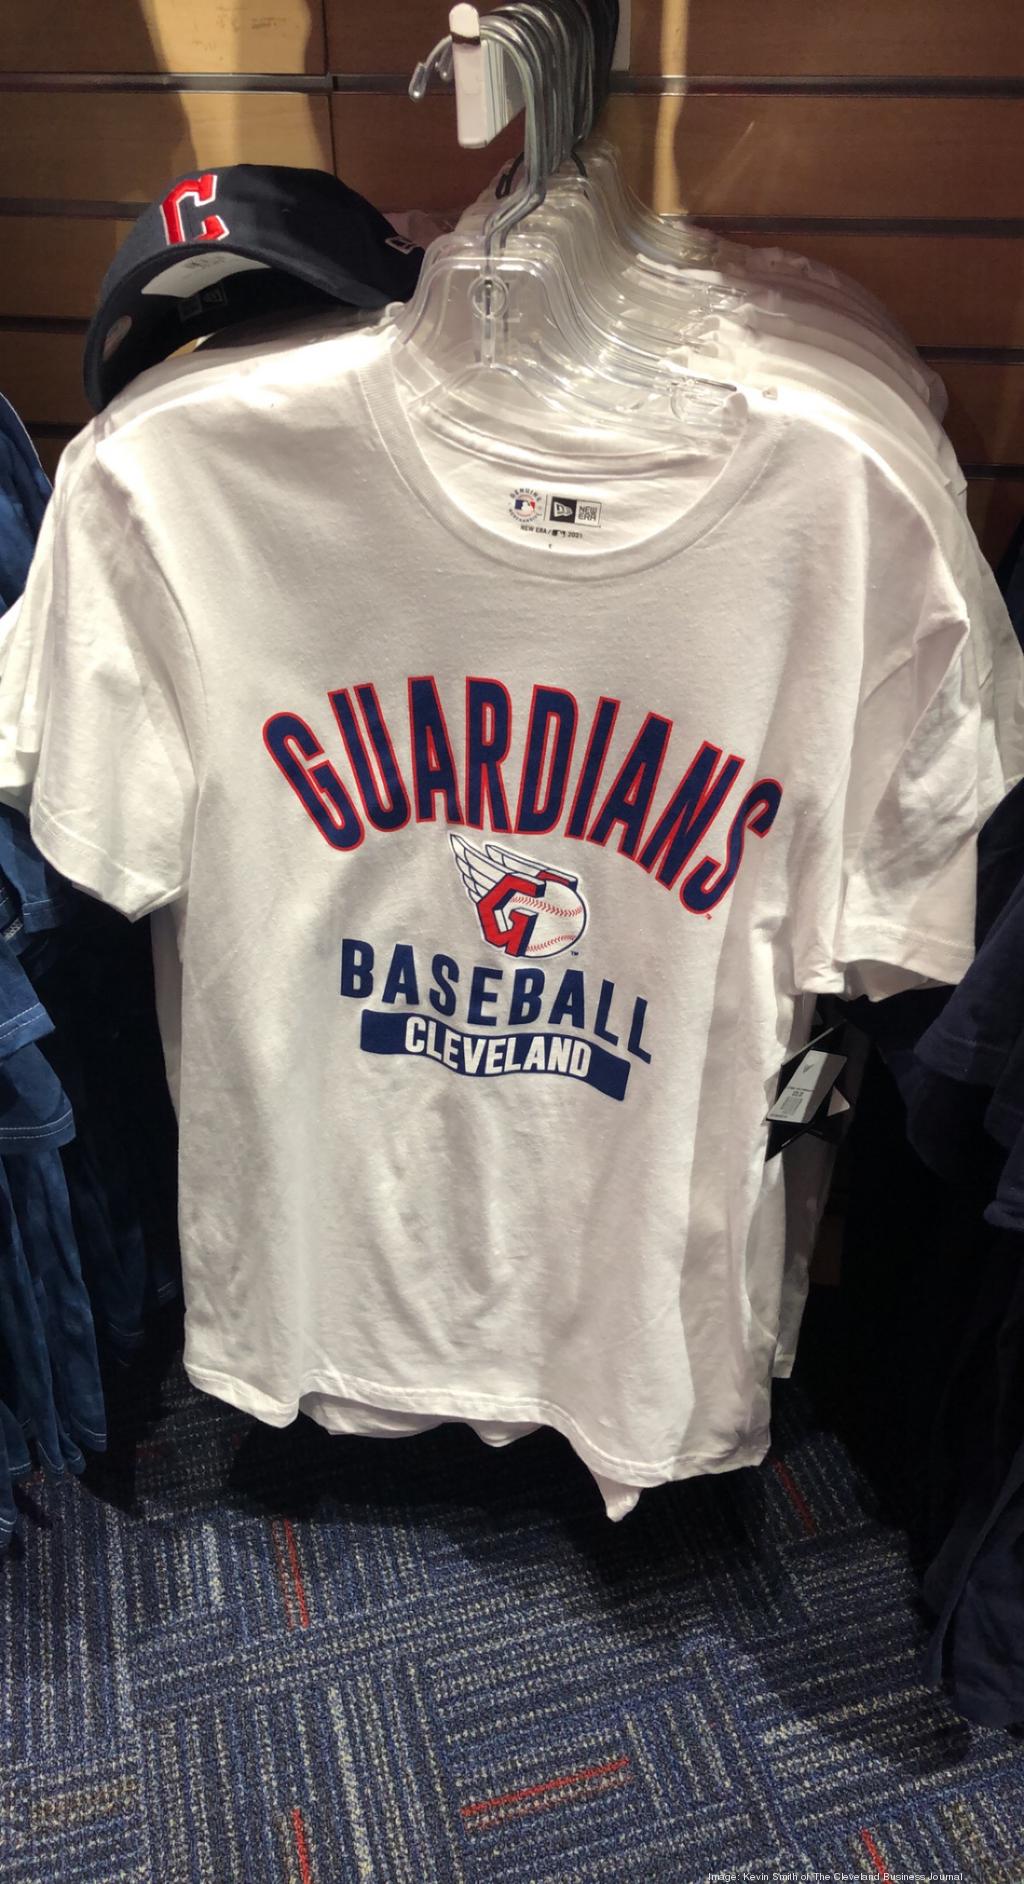 Guardians sign falls off team store as new merchandise goes on sale -  Cleveland Business Journal